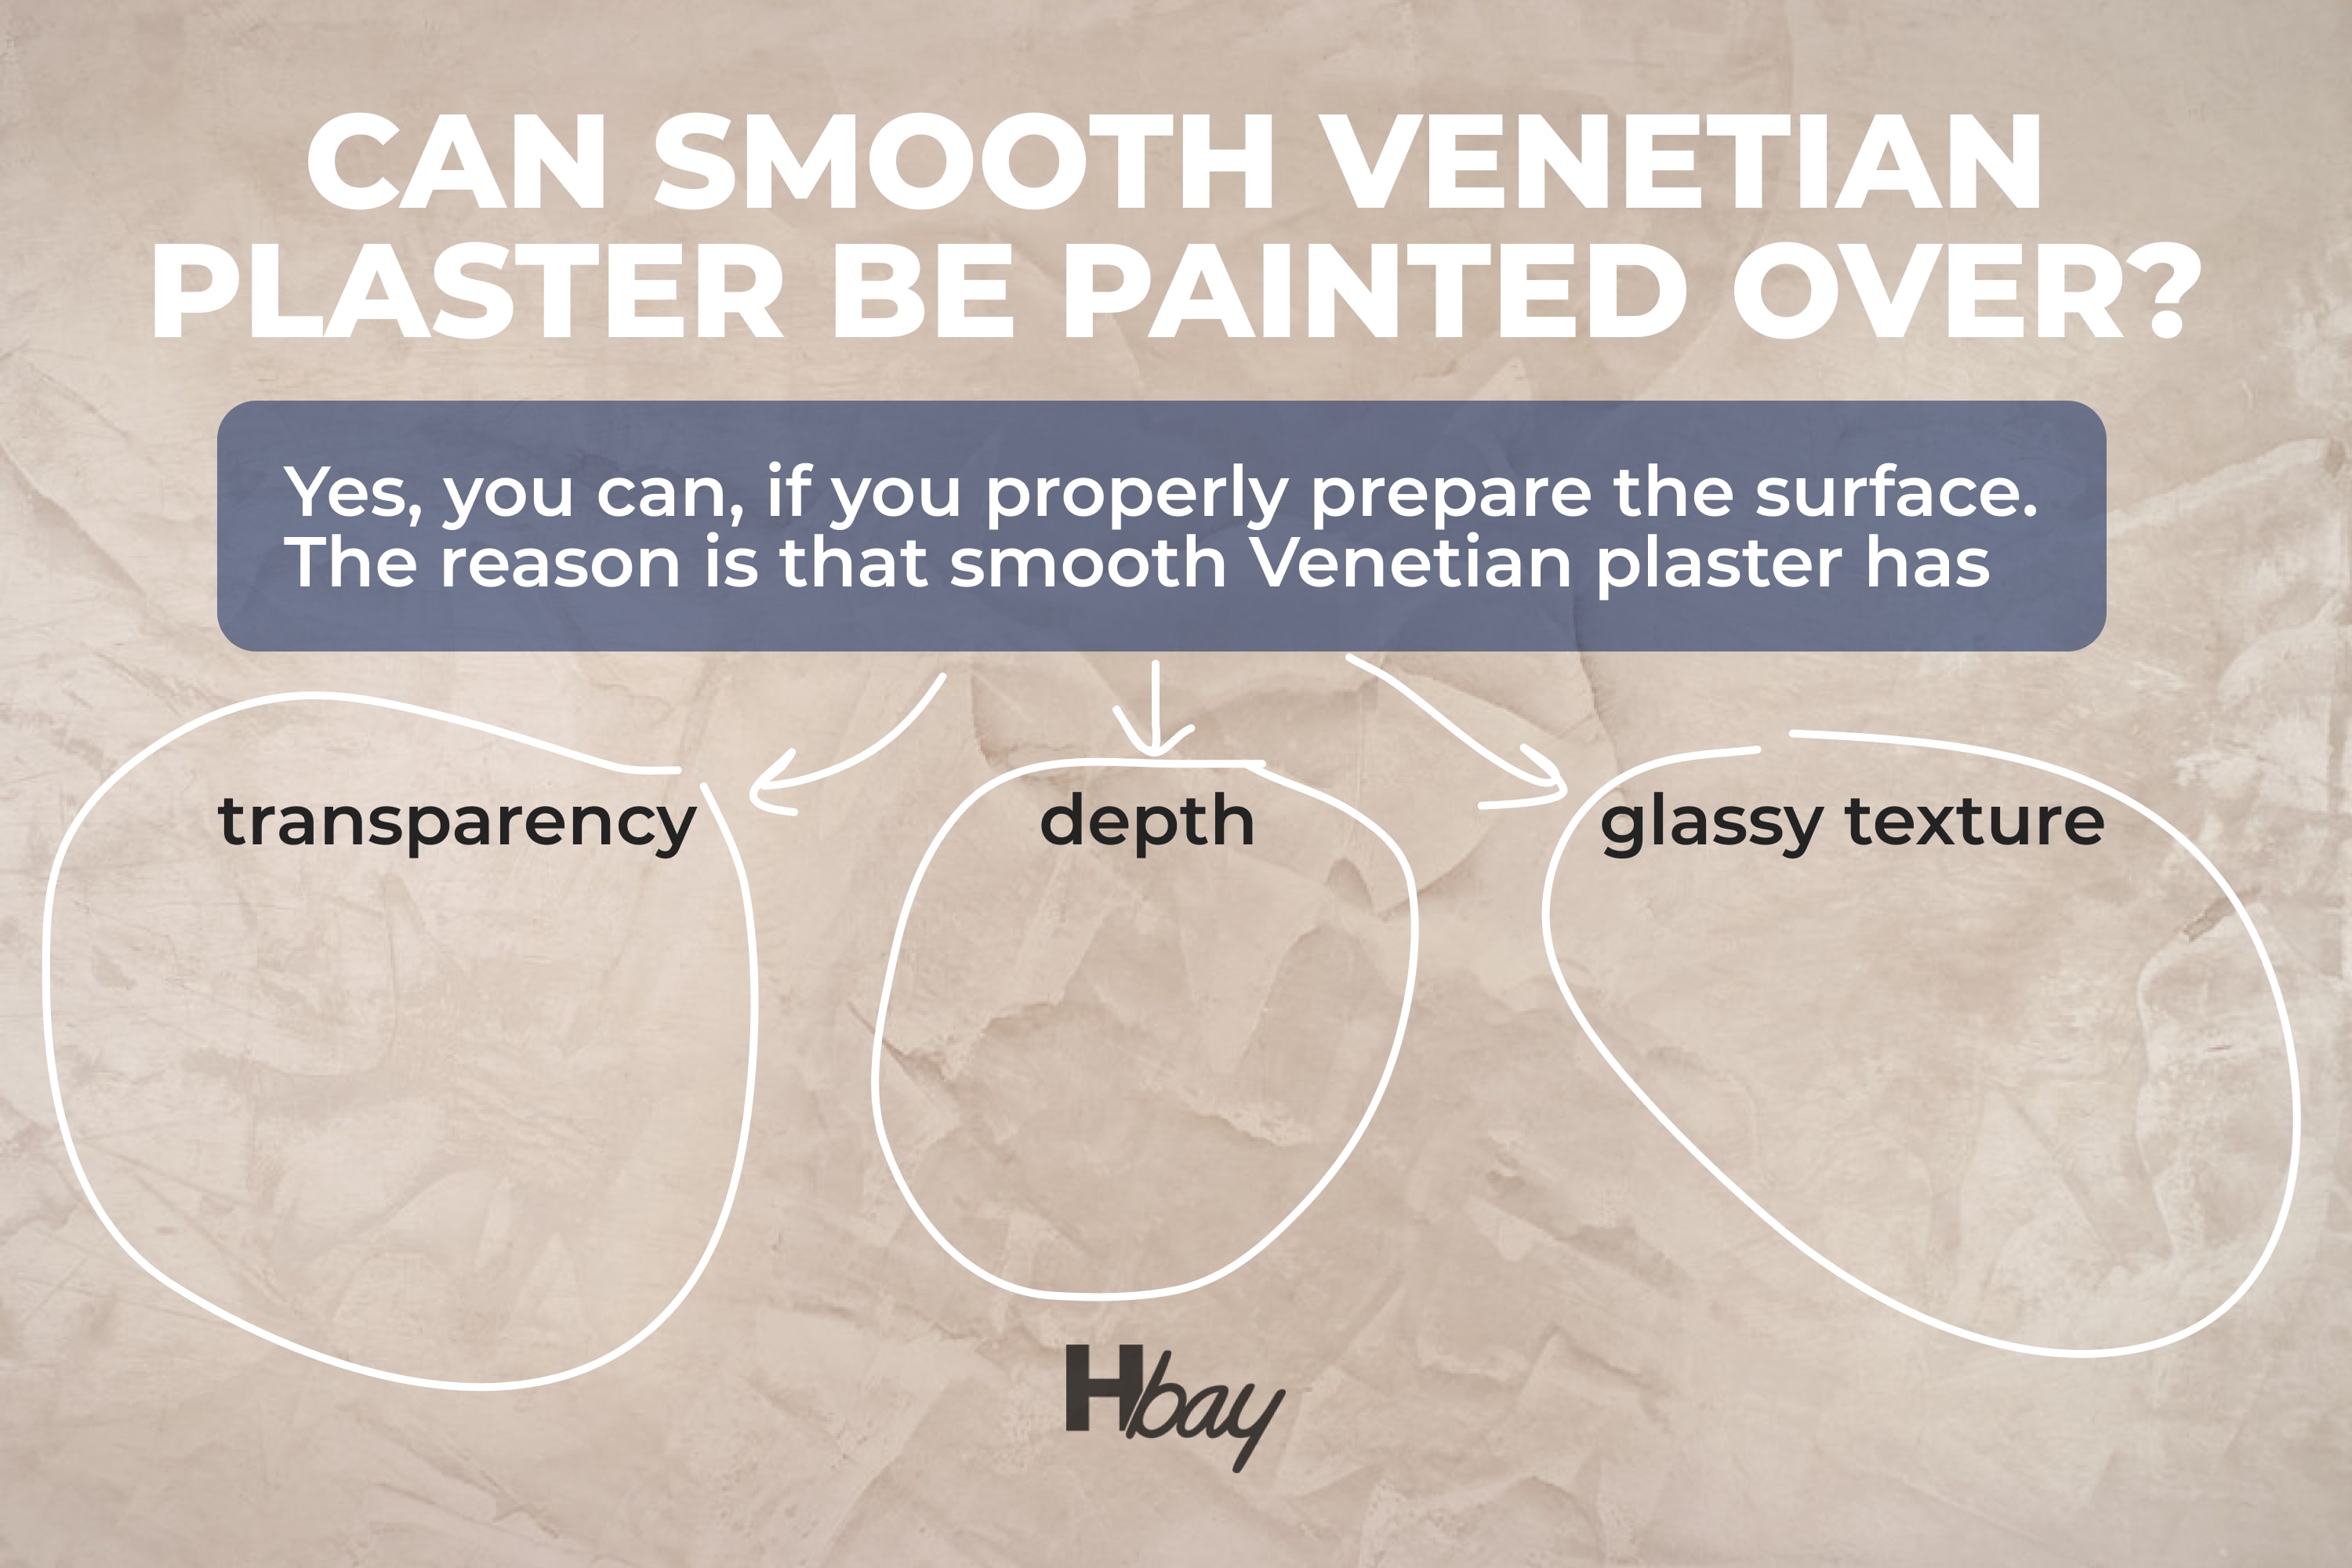 Can smooth Venetian plaster be painted over